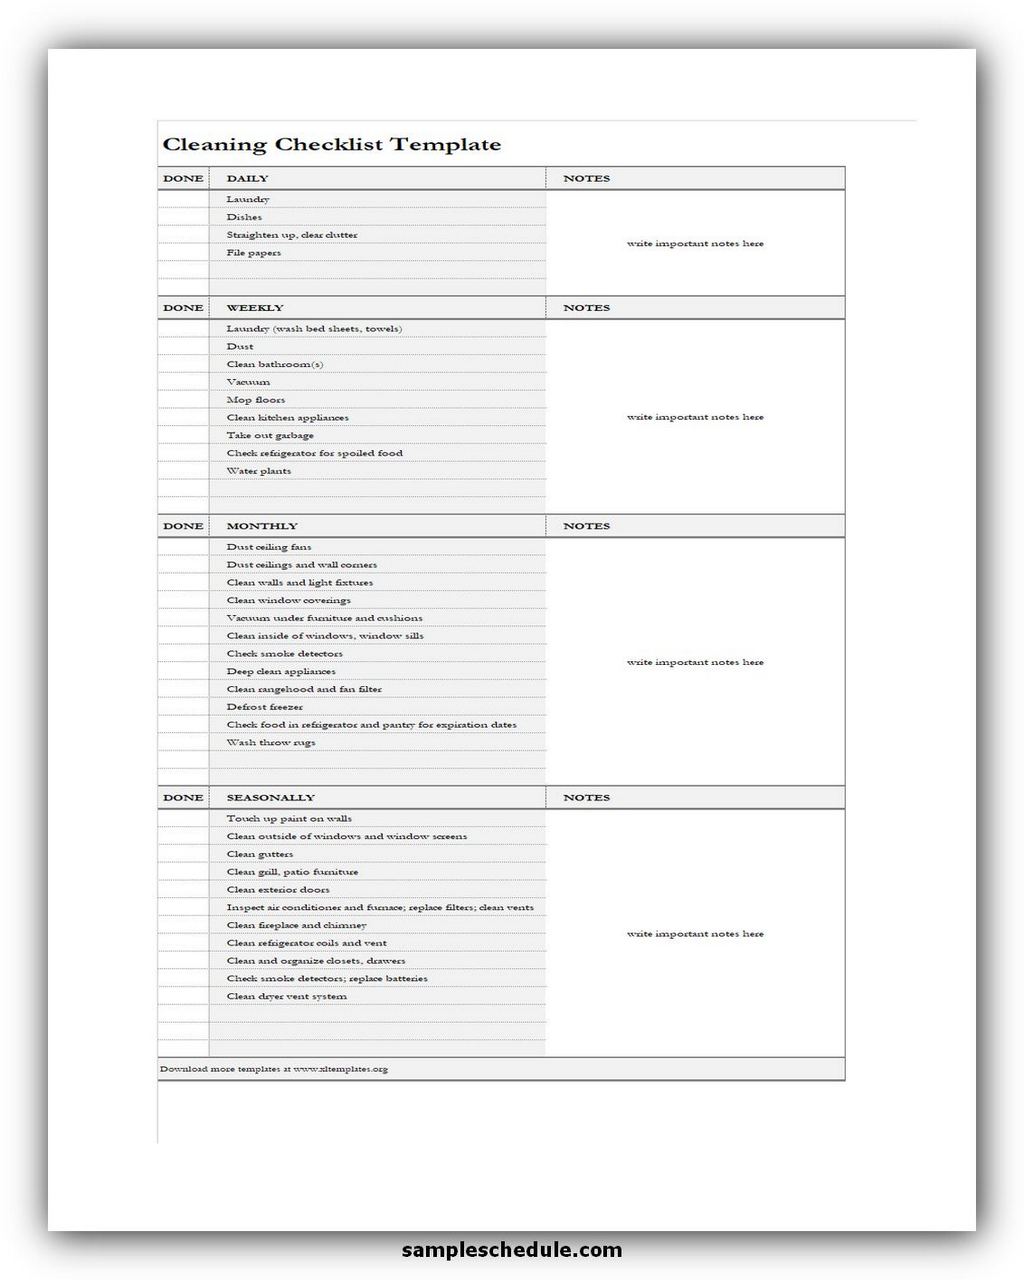 5-free-cleaning-checklist-template-excel-sample-schedule